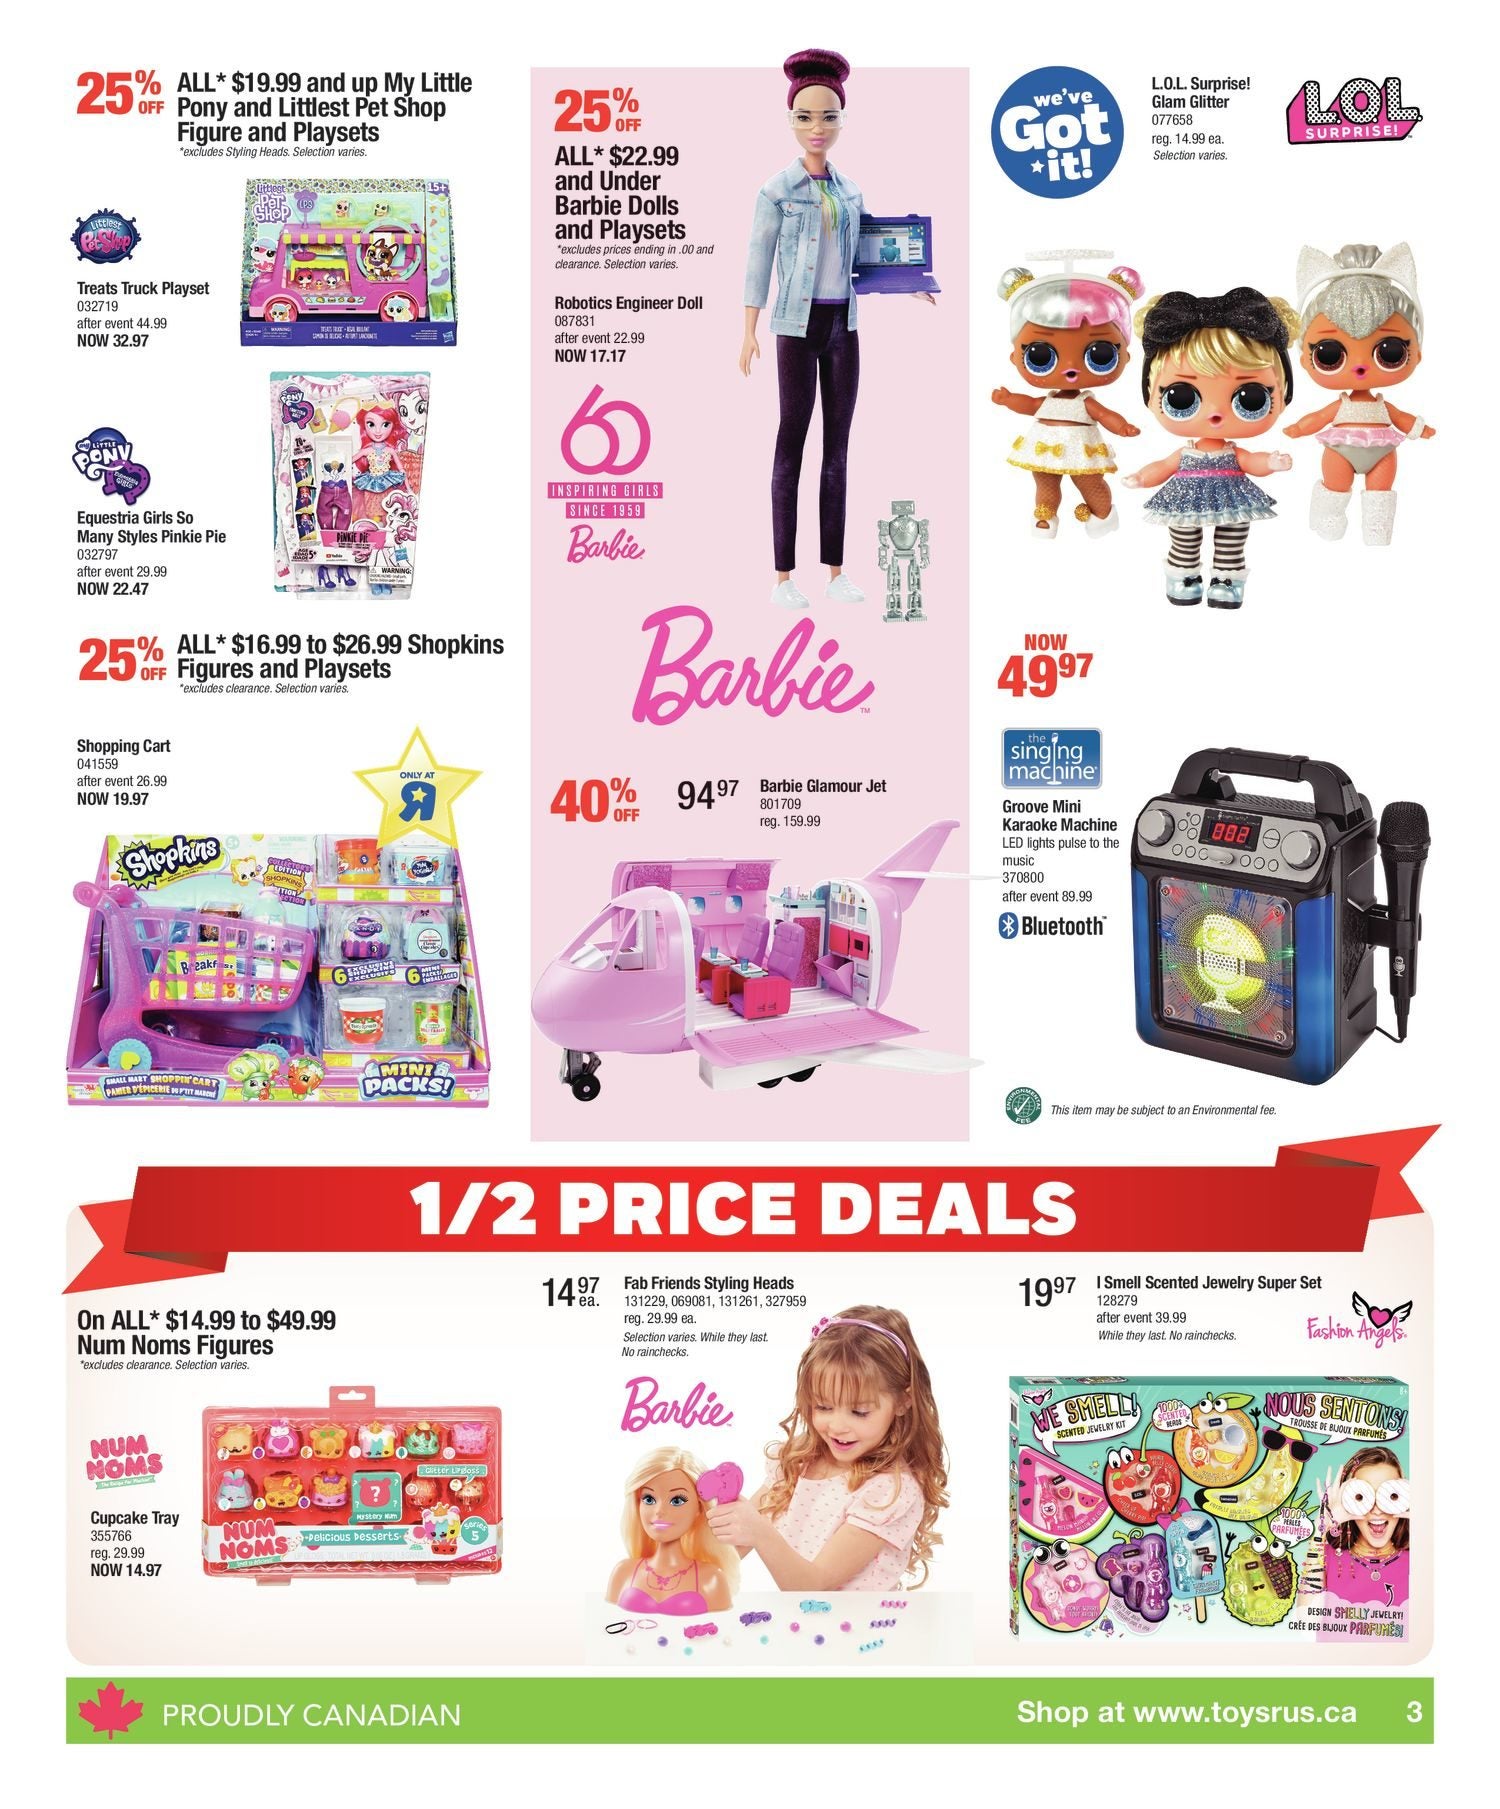 Toys R Us Weekly Flyer Weekly Nov 16 22 Redflagdeals Com - i drank the potion and turned into a creepy doll roblox enchanted academy roblox roleplay